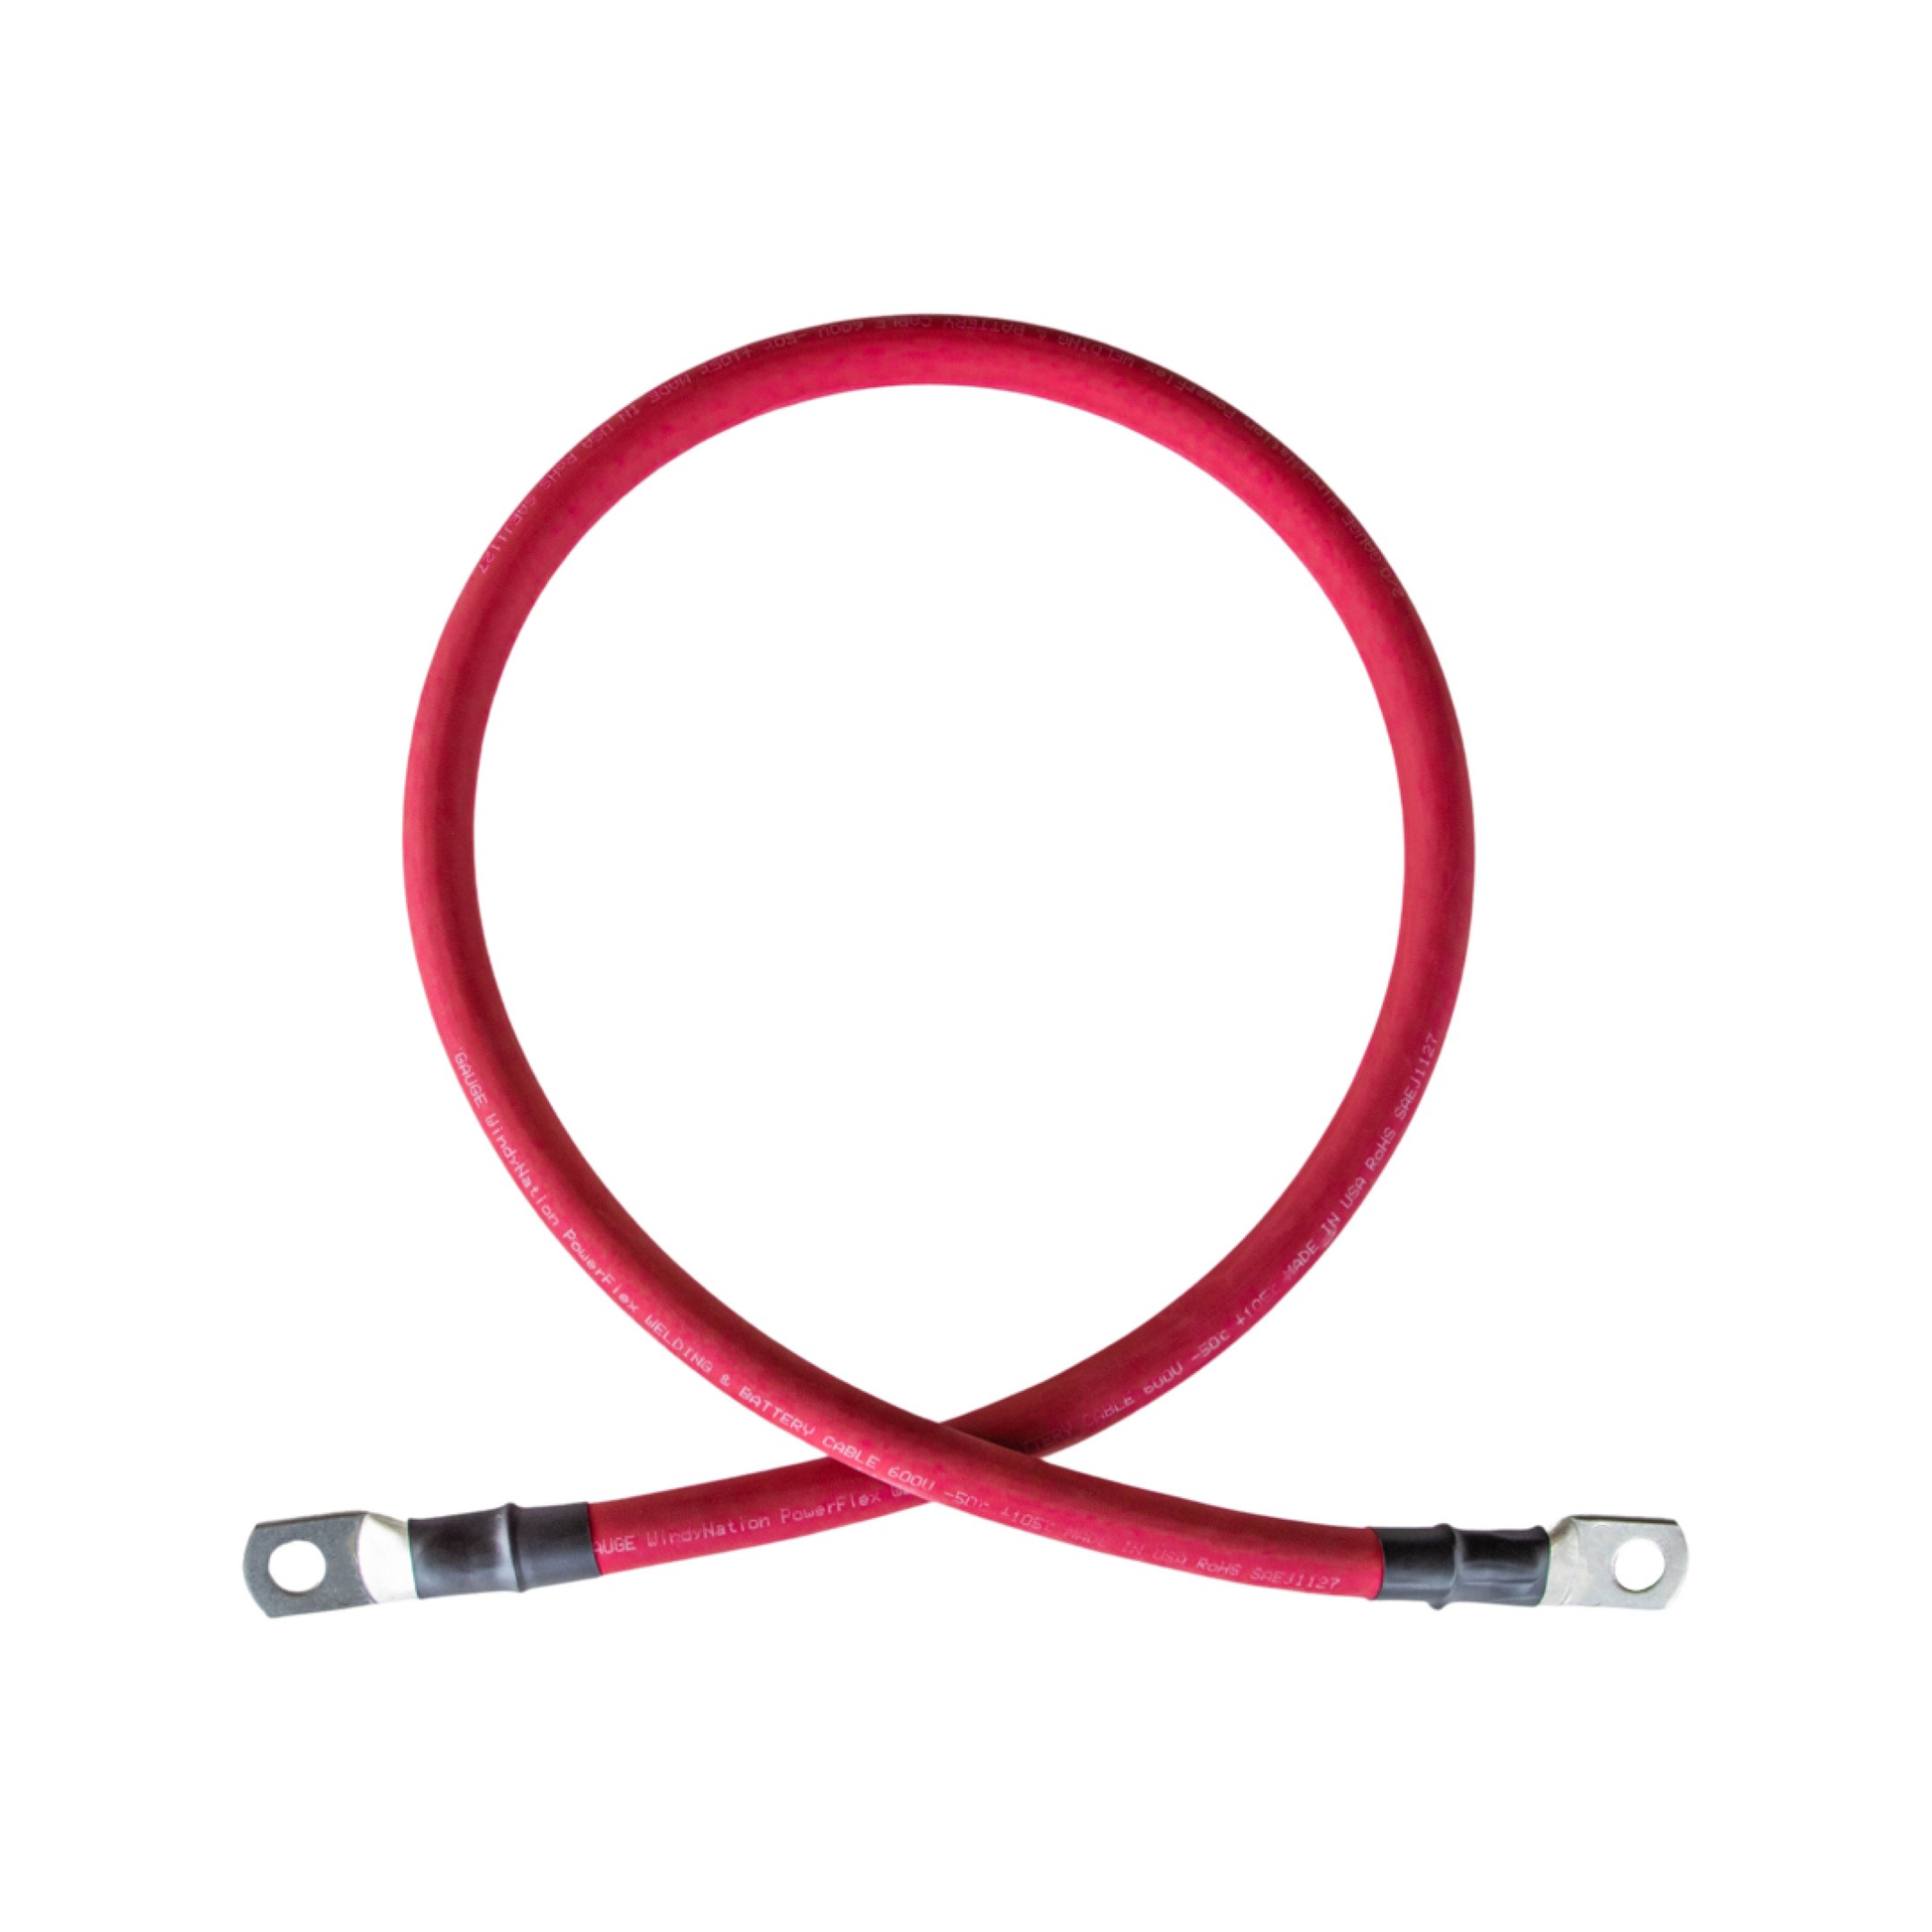 Battery Cable - Gauges from 6 through 4/0 - WiringProducts, Ltd